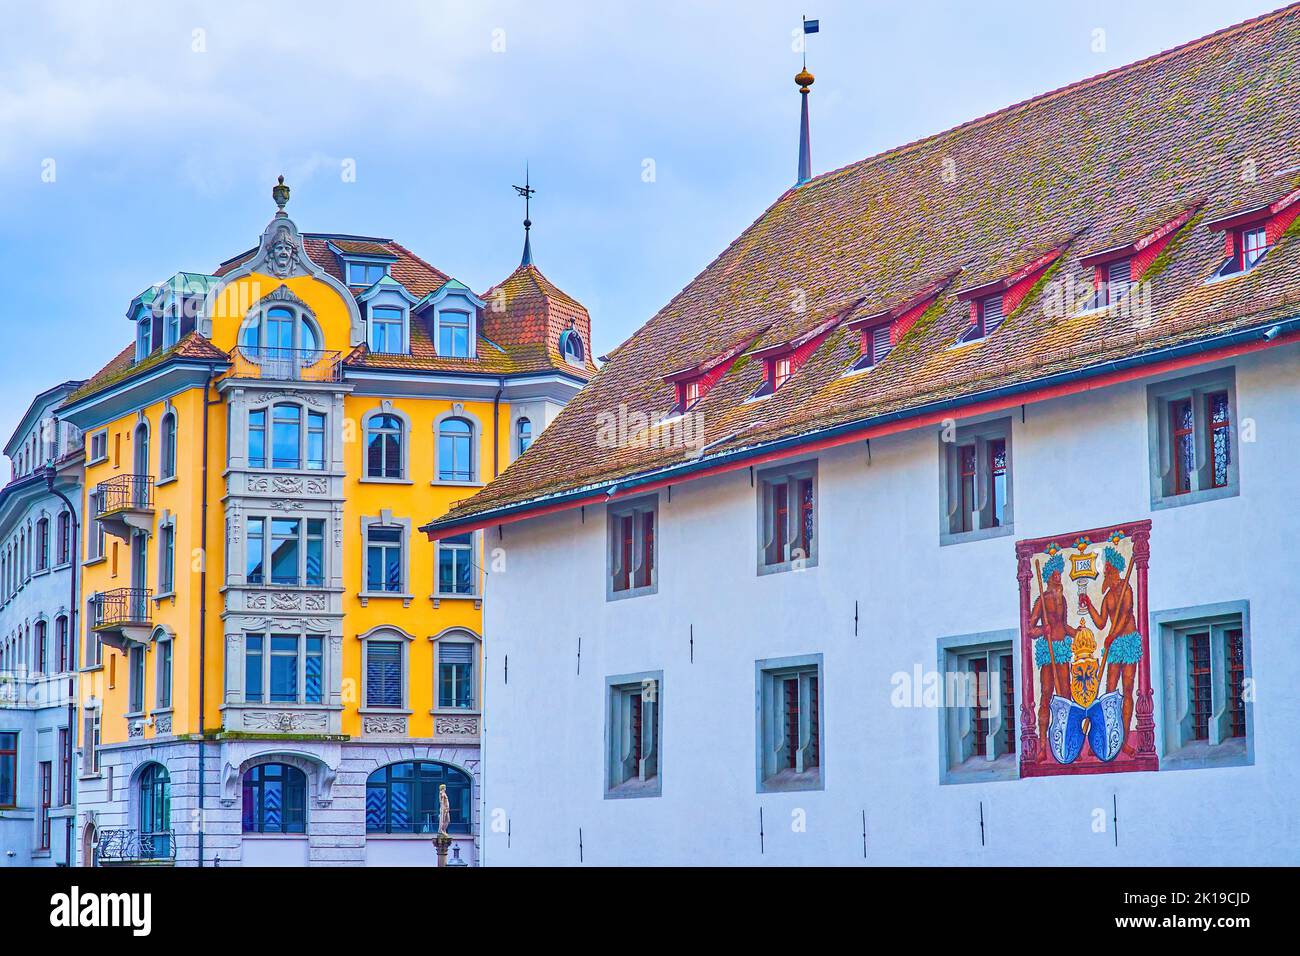 Townhouses with scenic medieval art, the colorful murals on walls, Altstadt of Lucerne, Switzerland Stock Photo